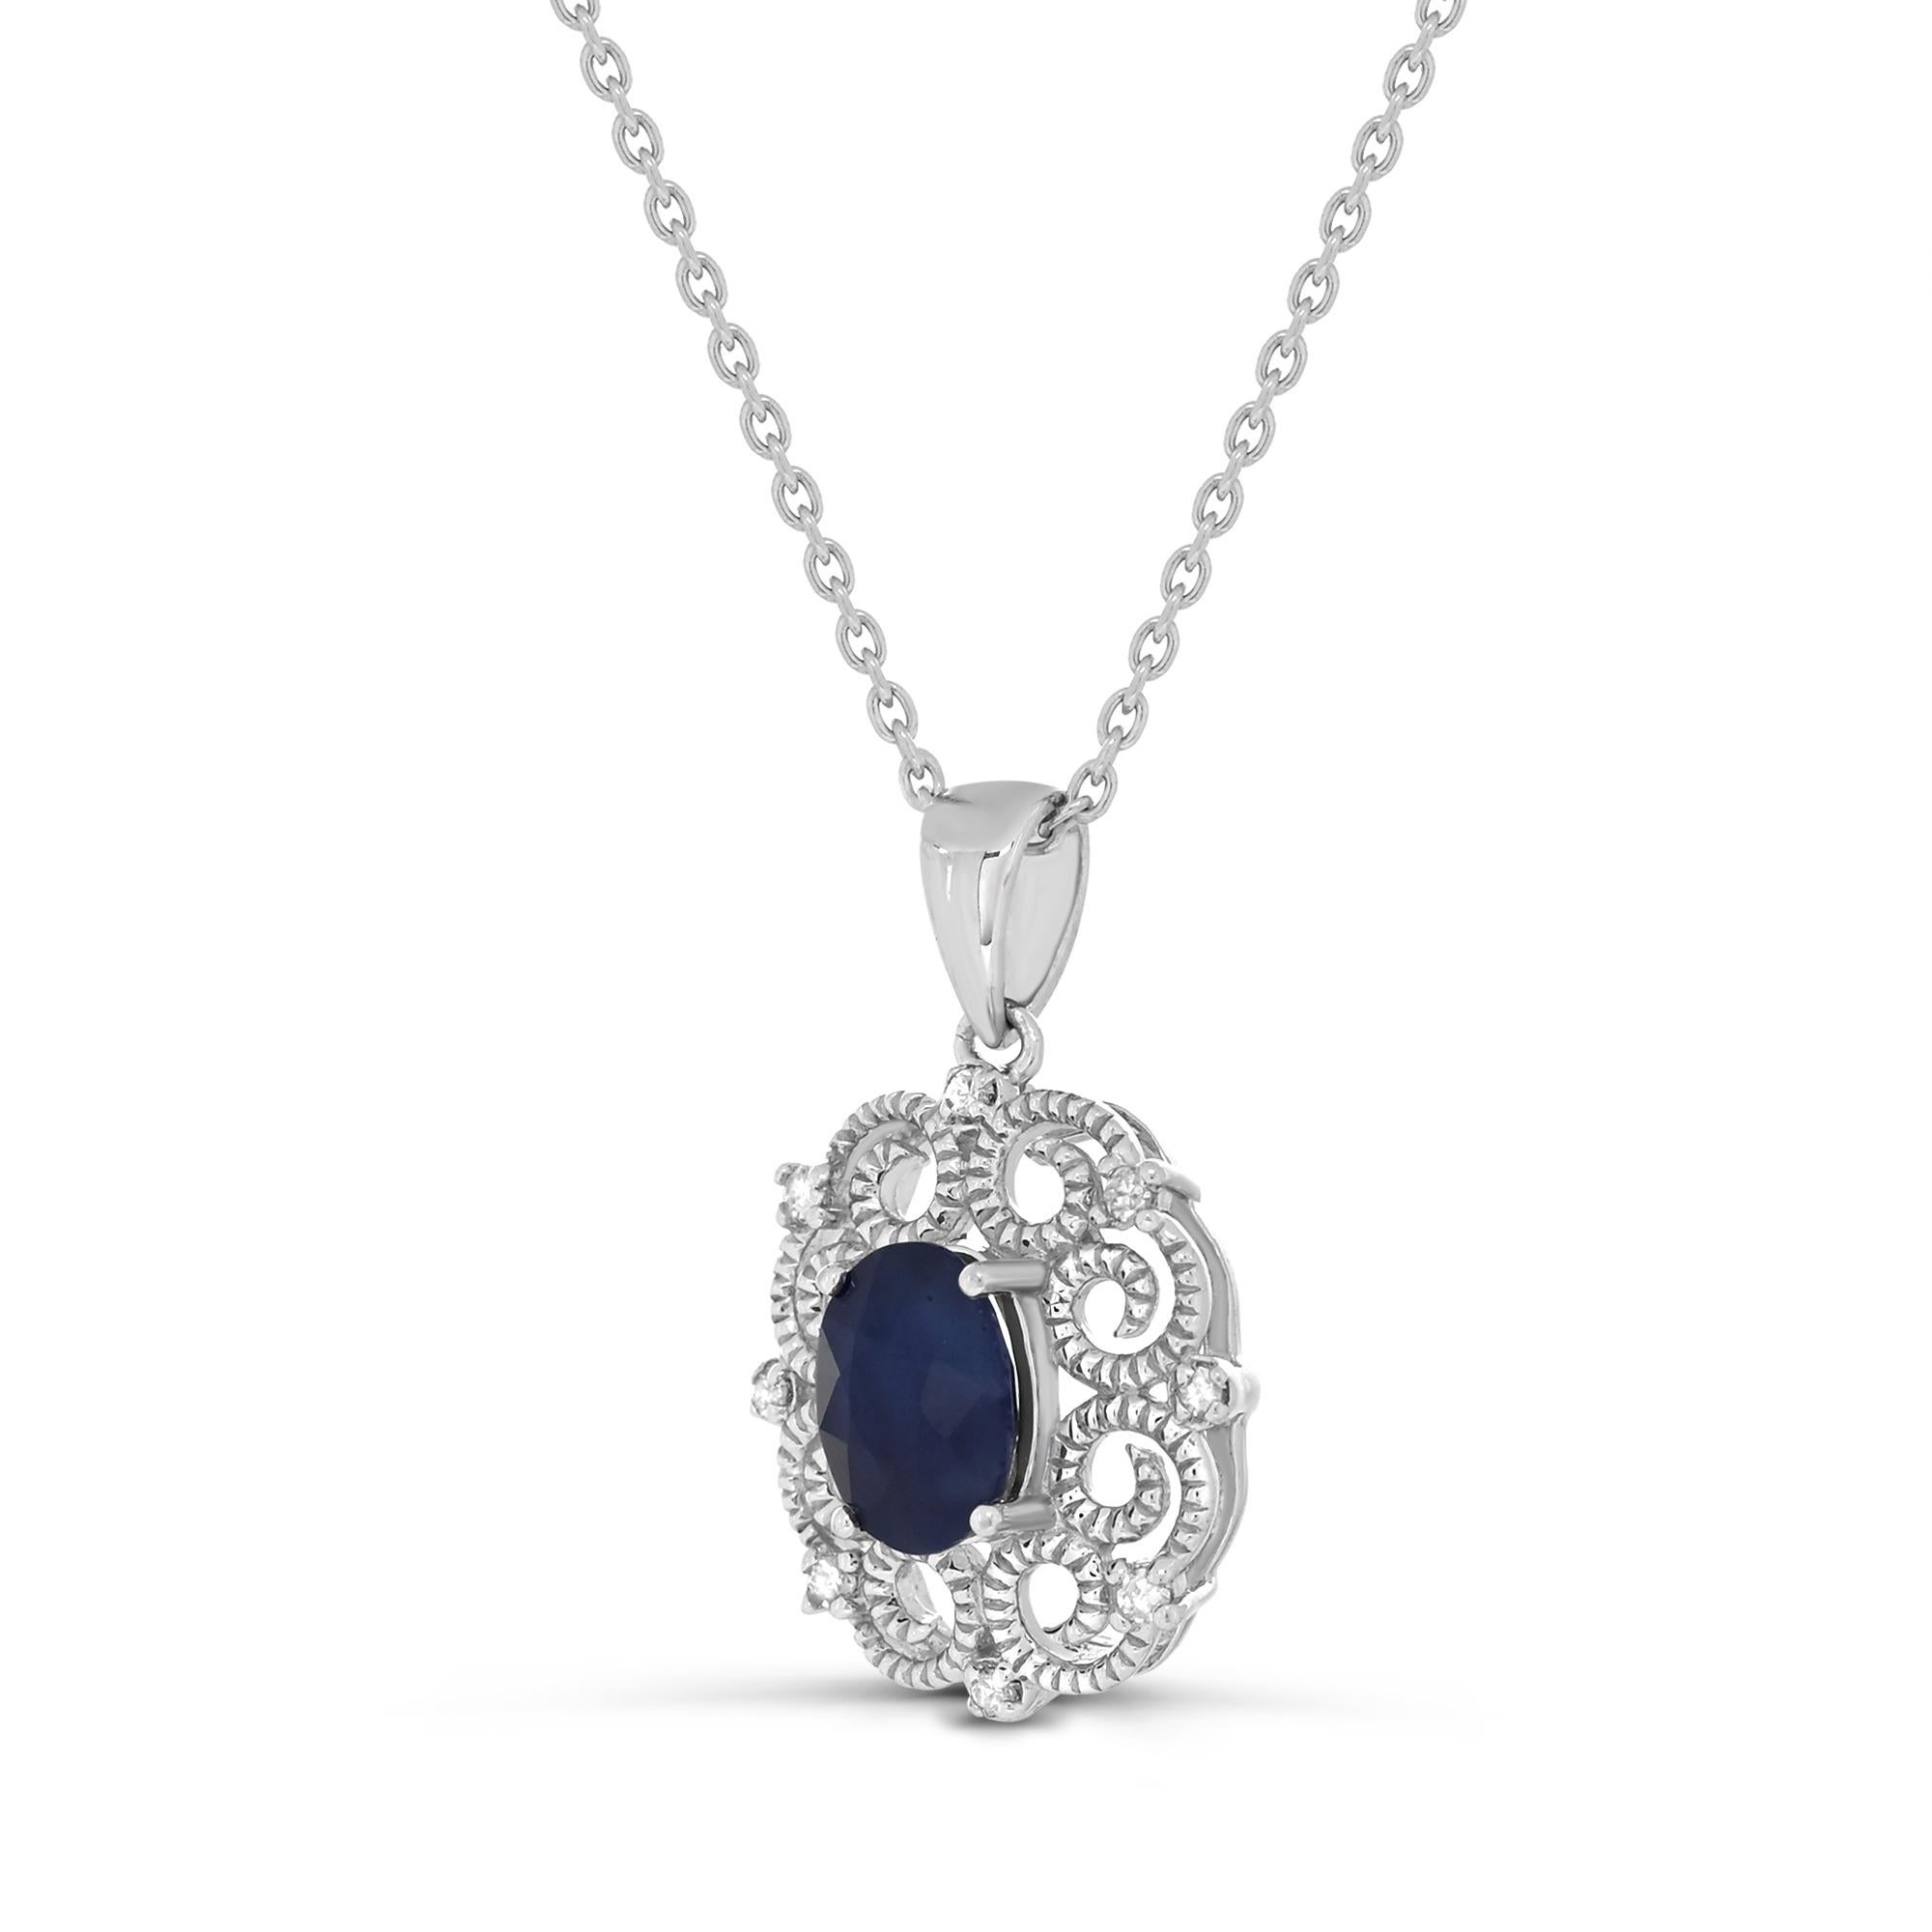 Indulge in the elegance of our Sapphire and White Diamond Retro Border Pendant Necklace in Sterling Silver. Crafted with meticulous attention to detail, this necklace boasts a stunning combination of one oval-cut sapphire accented by sparkling round